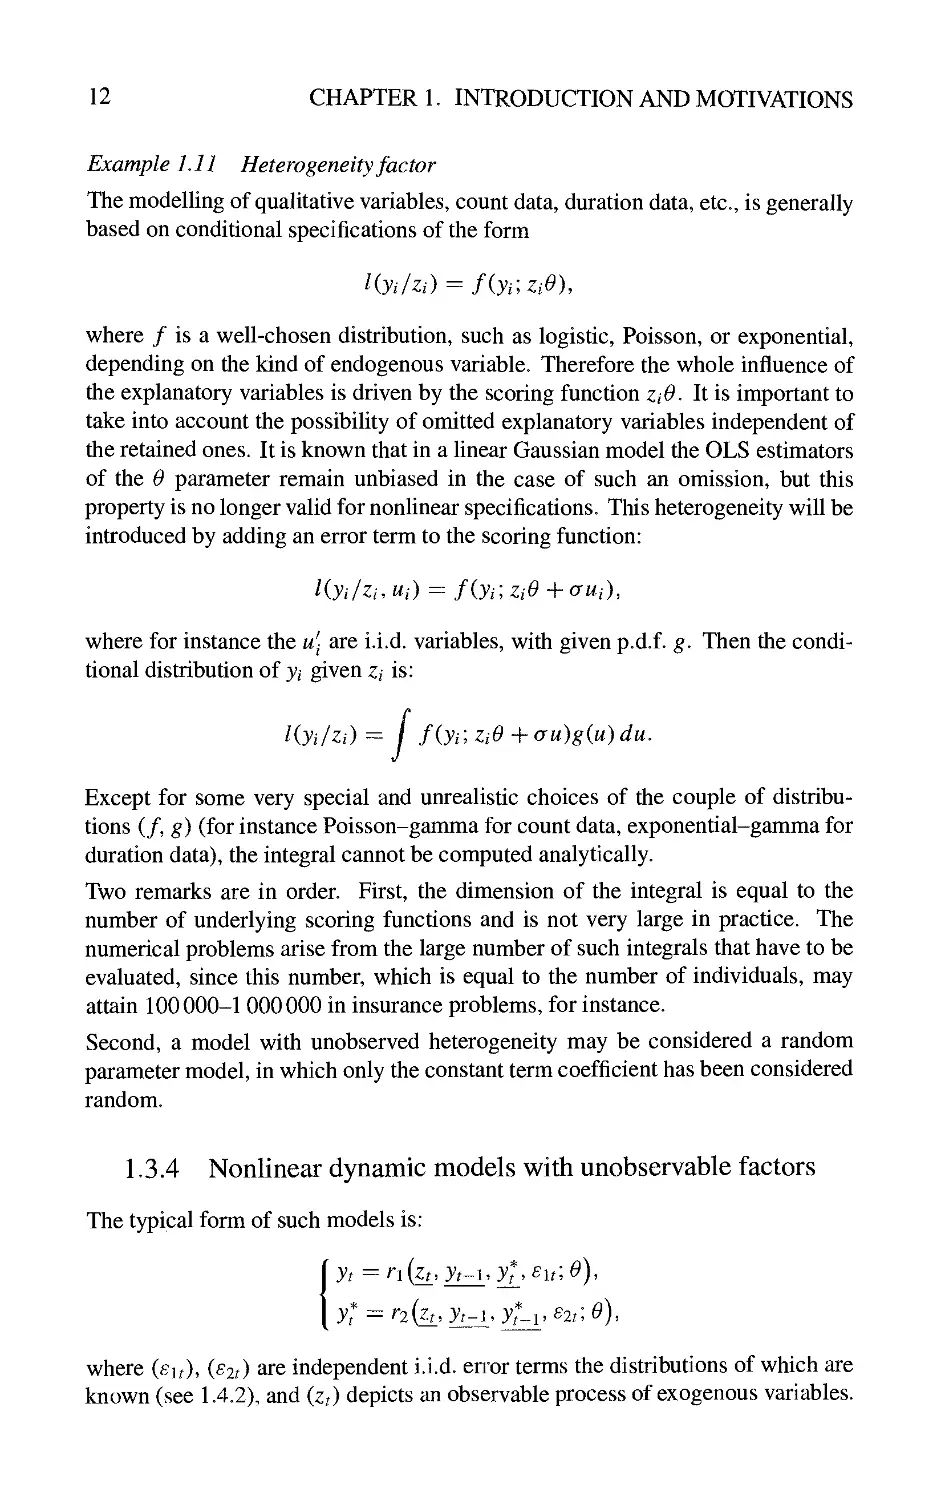 1.3.4 Nonlinear dynamic models with unobservable factors